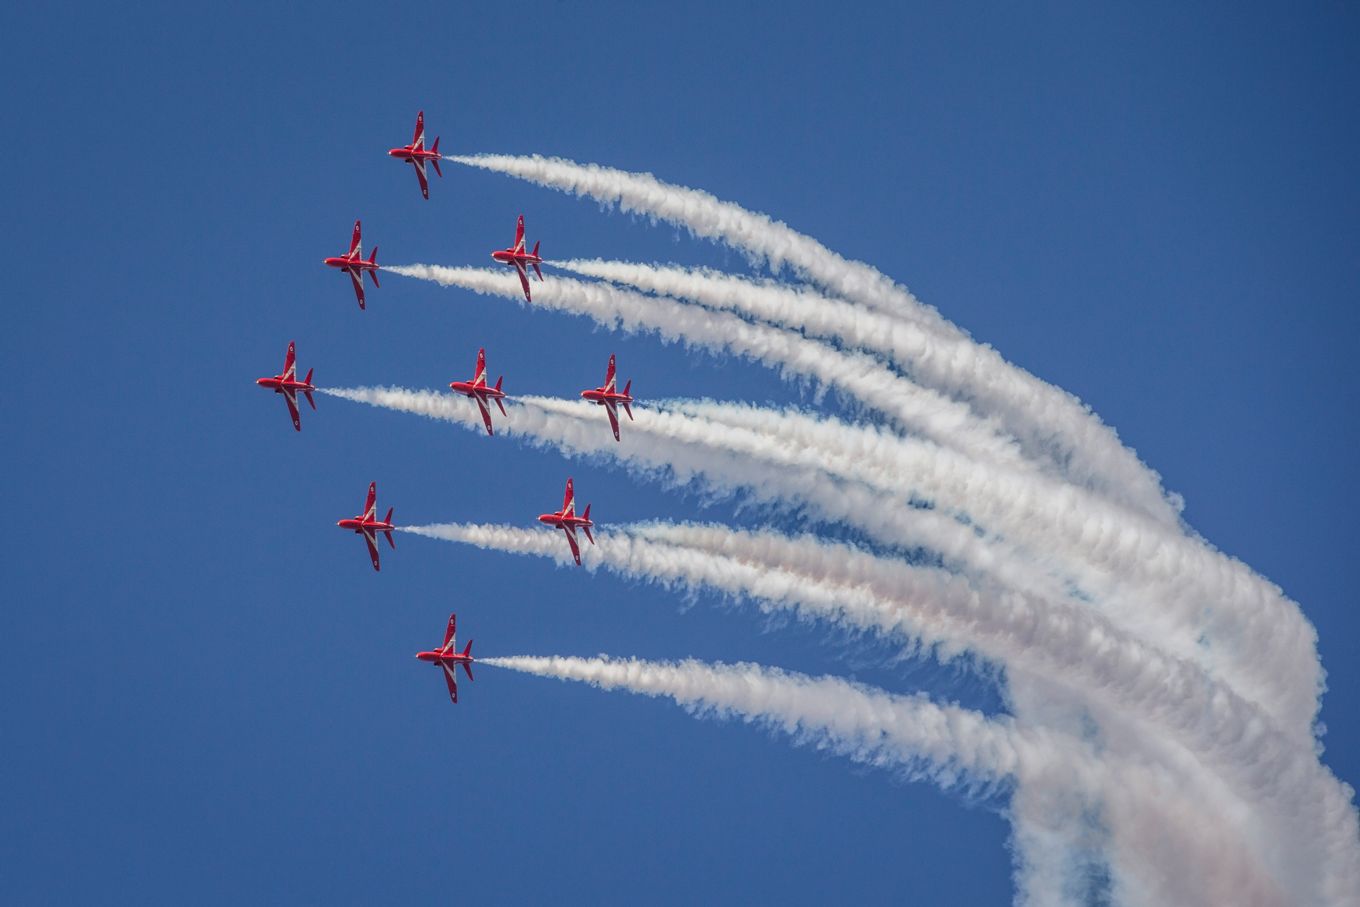 The documentary followed the Red Arrows over 12 months.